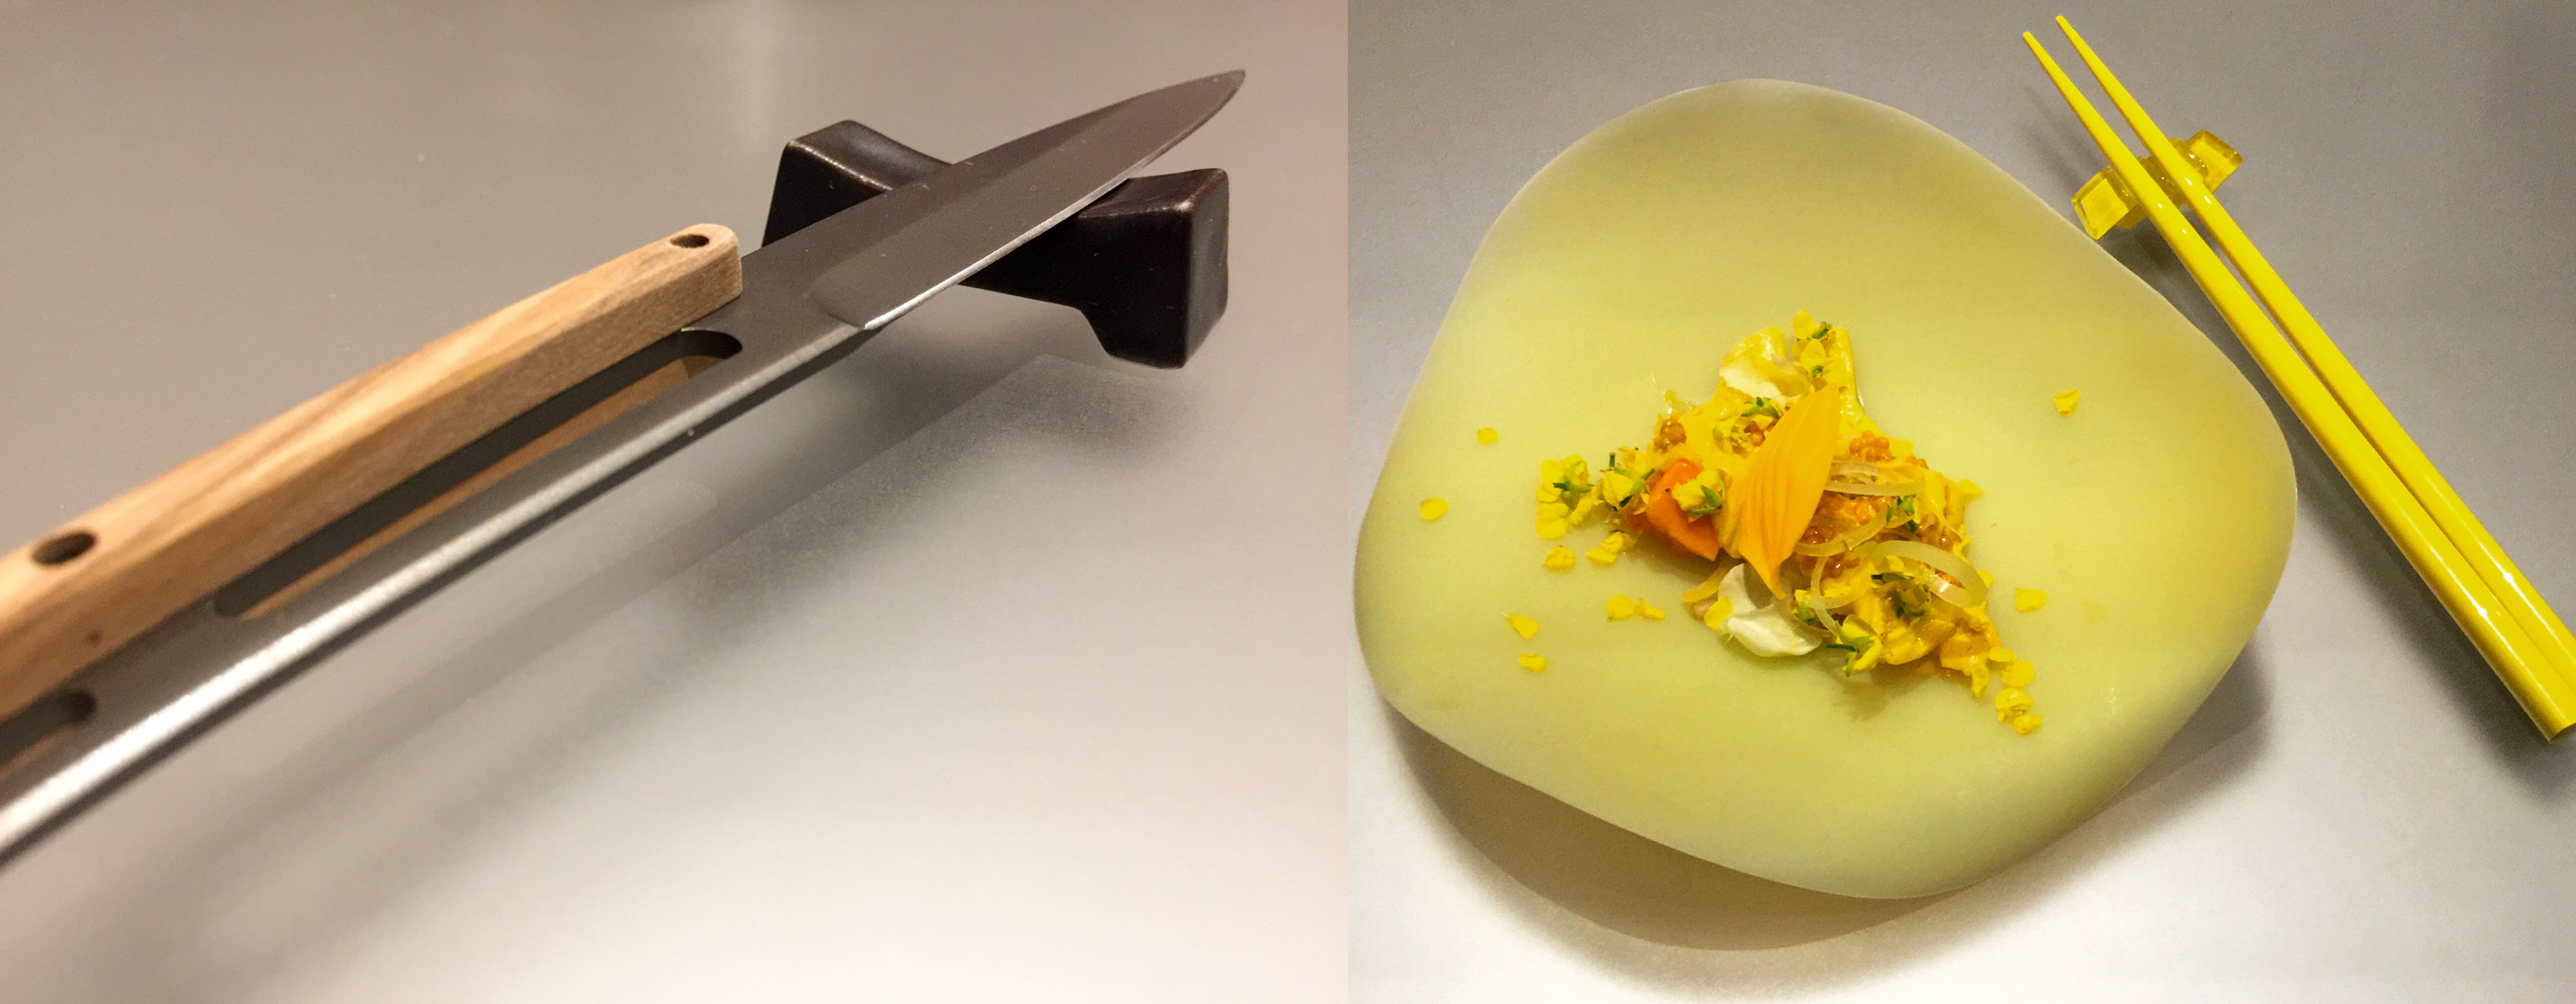 Steak knife and 'Yellow', Alinea, Chicago